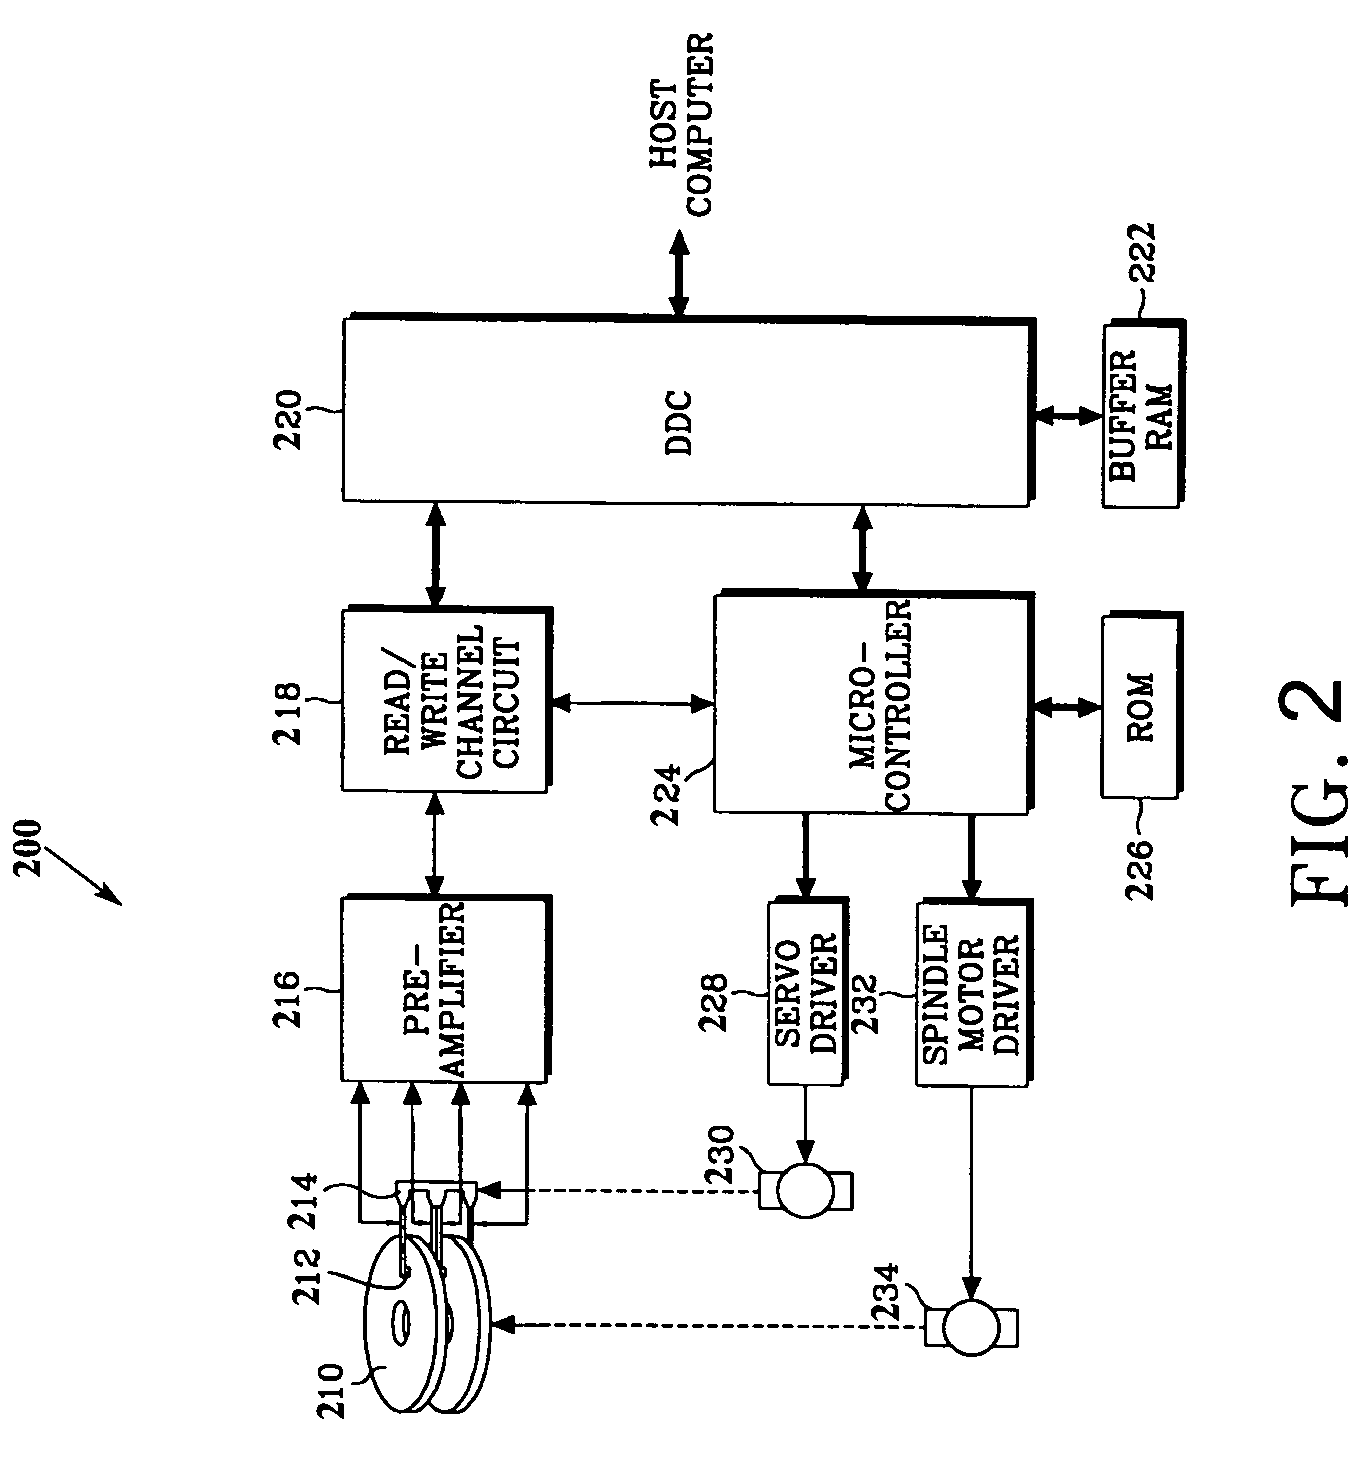 Apparatus for providing data dependent detection in a data read channel